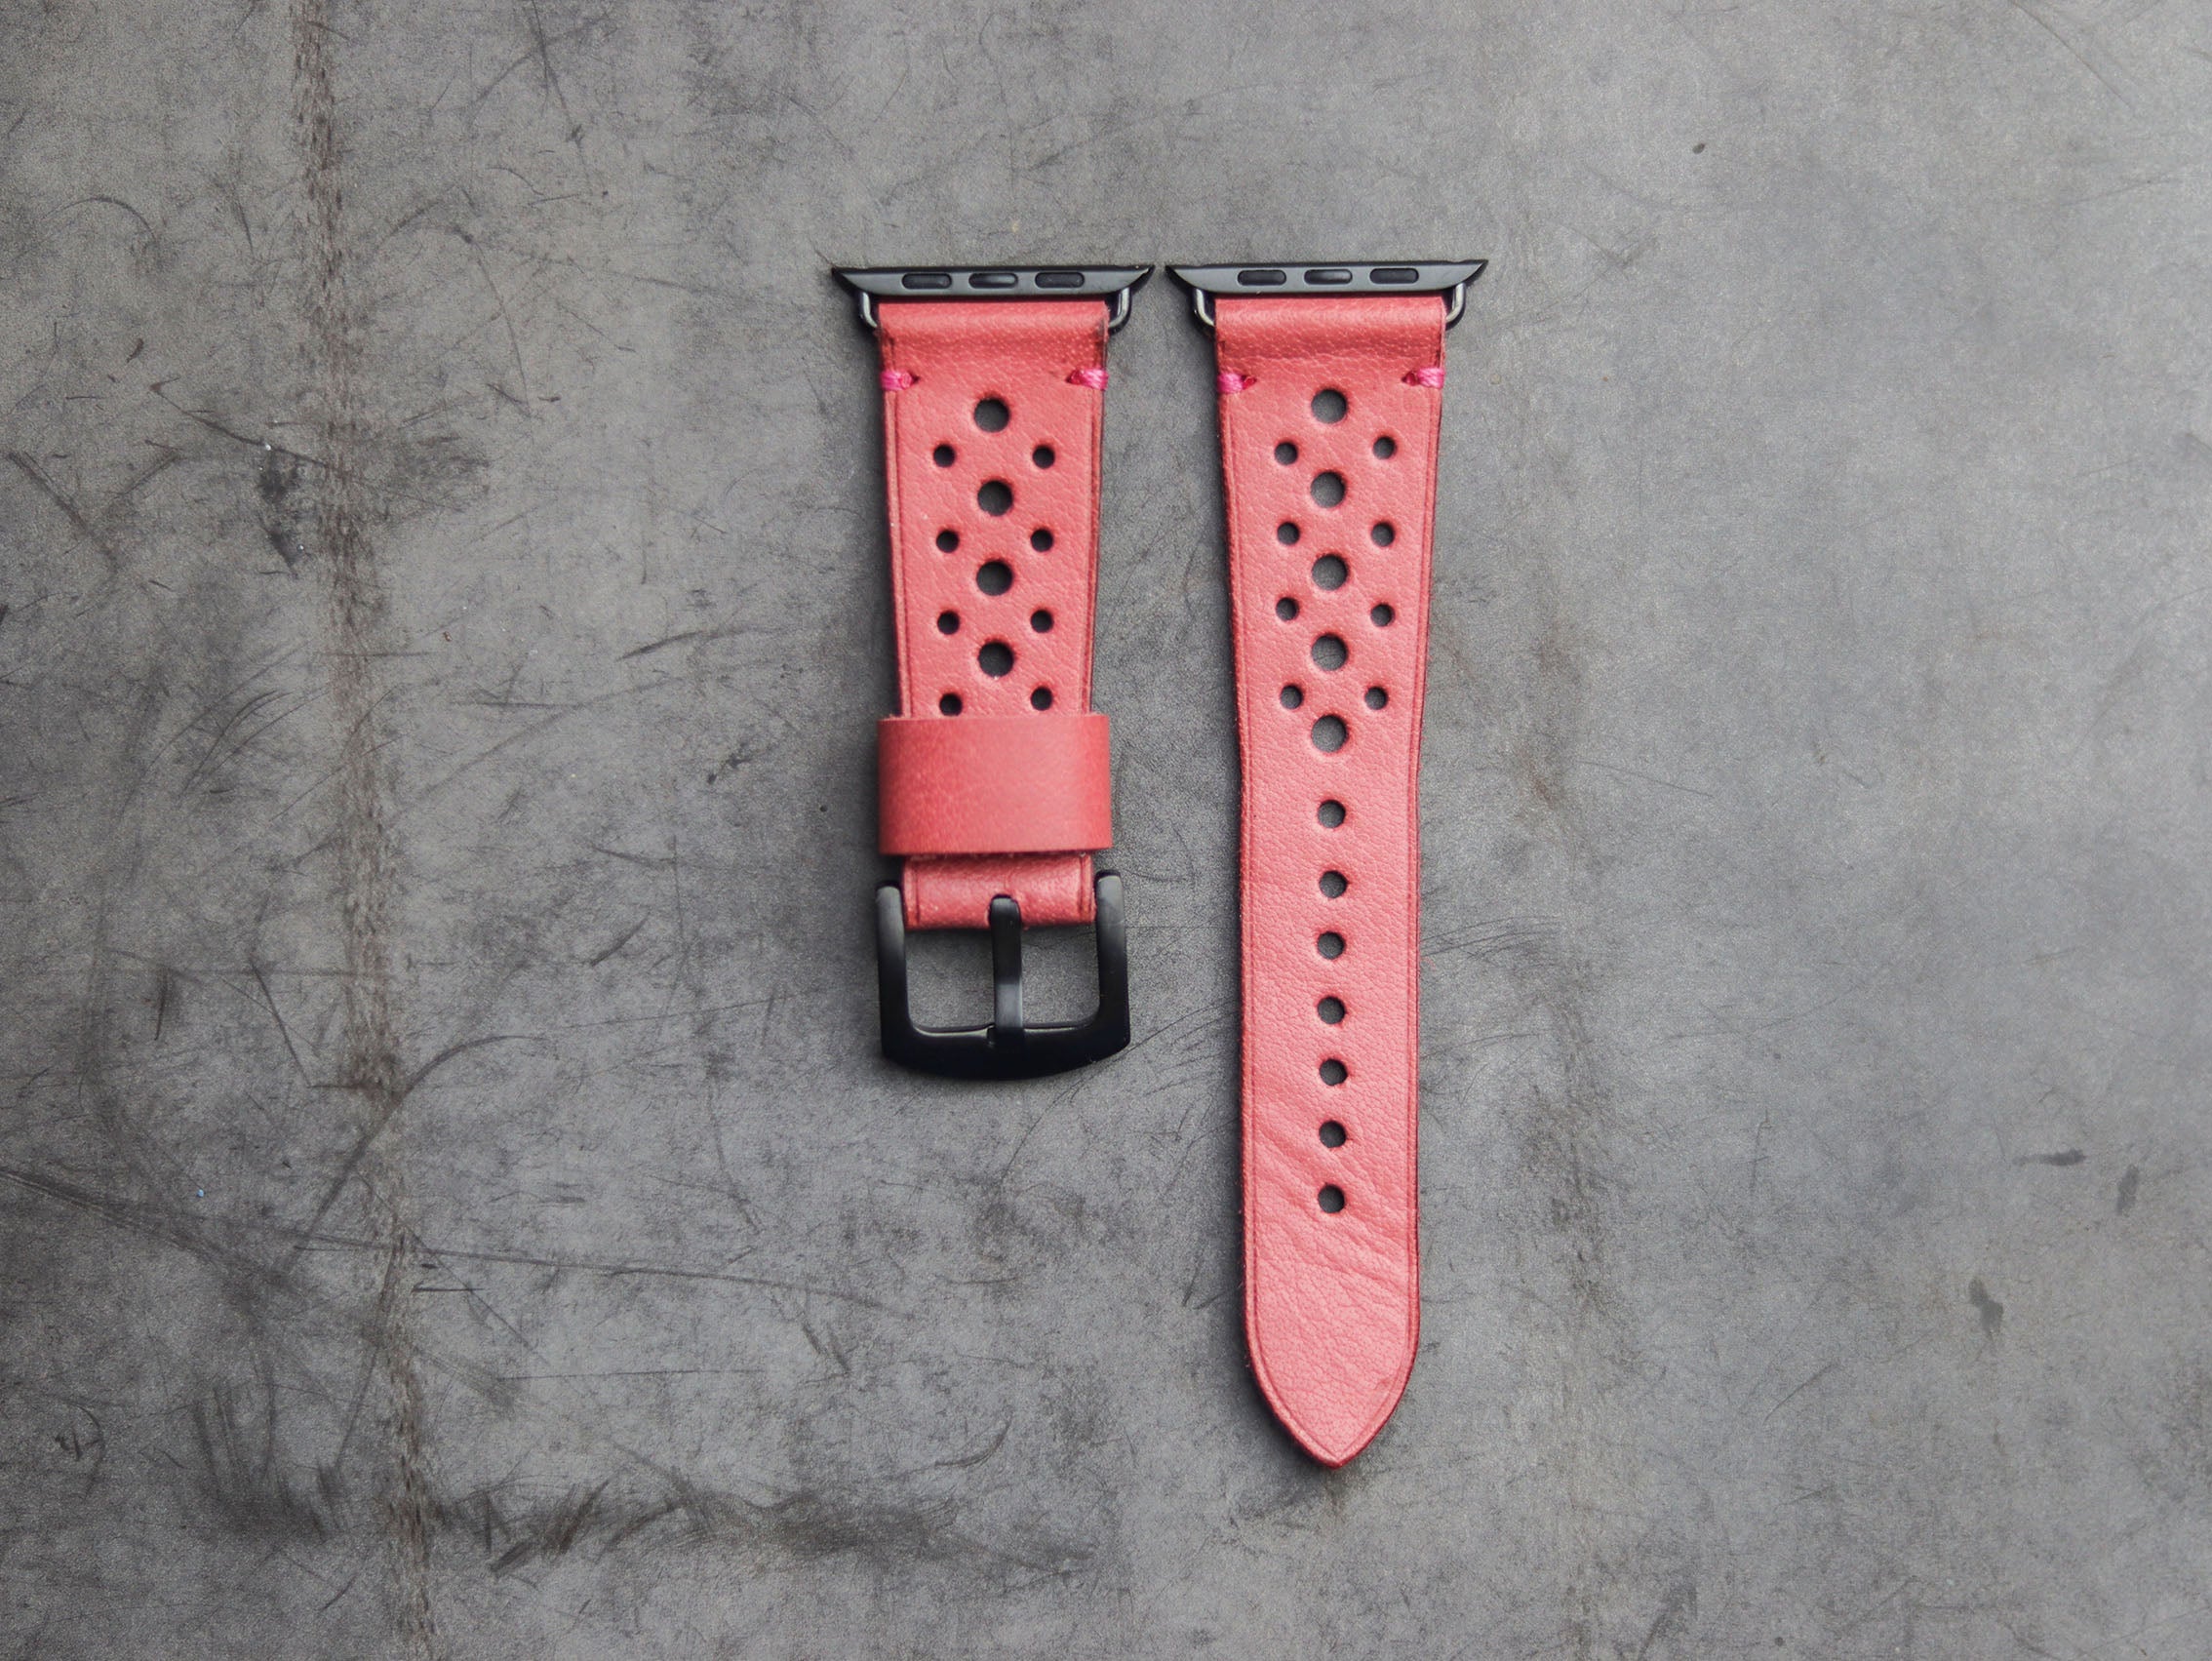 FLAMINGO PINK RALLY HAND-CRAFTED APPLE WATCH STRAPS